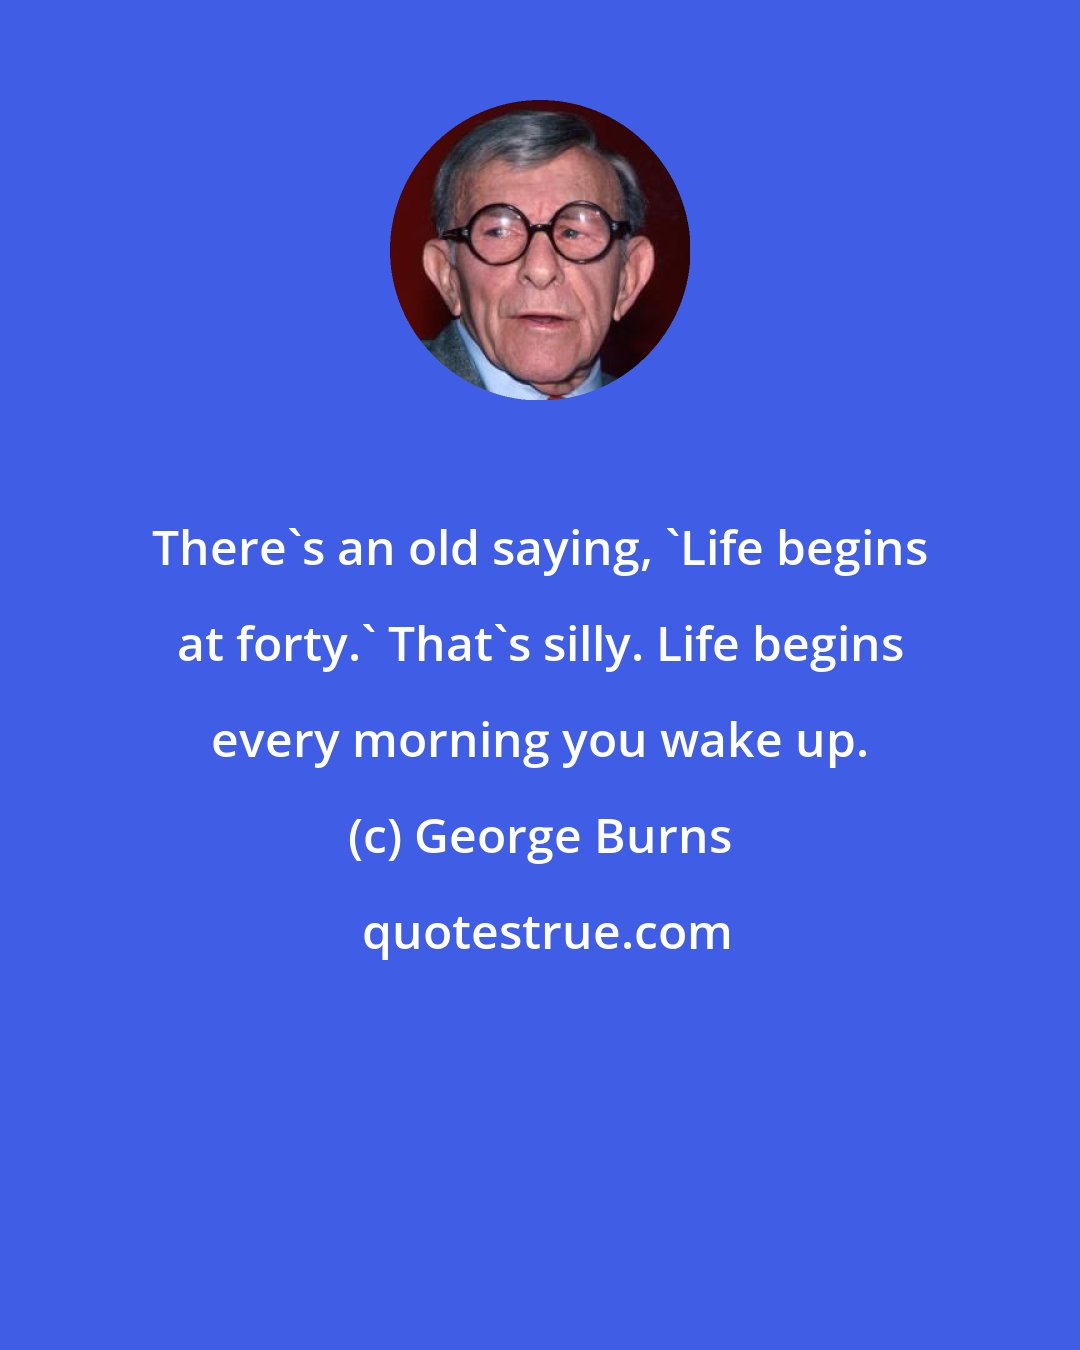 George Burns: There's an old saying, 'Life begins at forty.' That's silly. Life begins every morning you wake up.